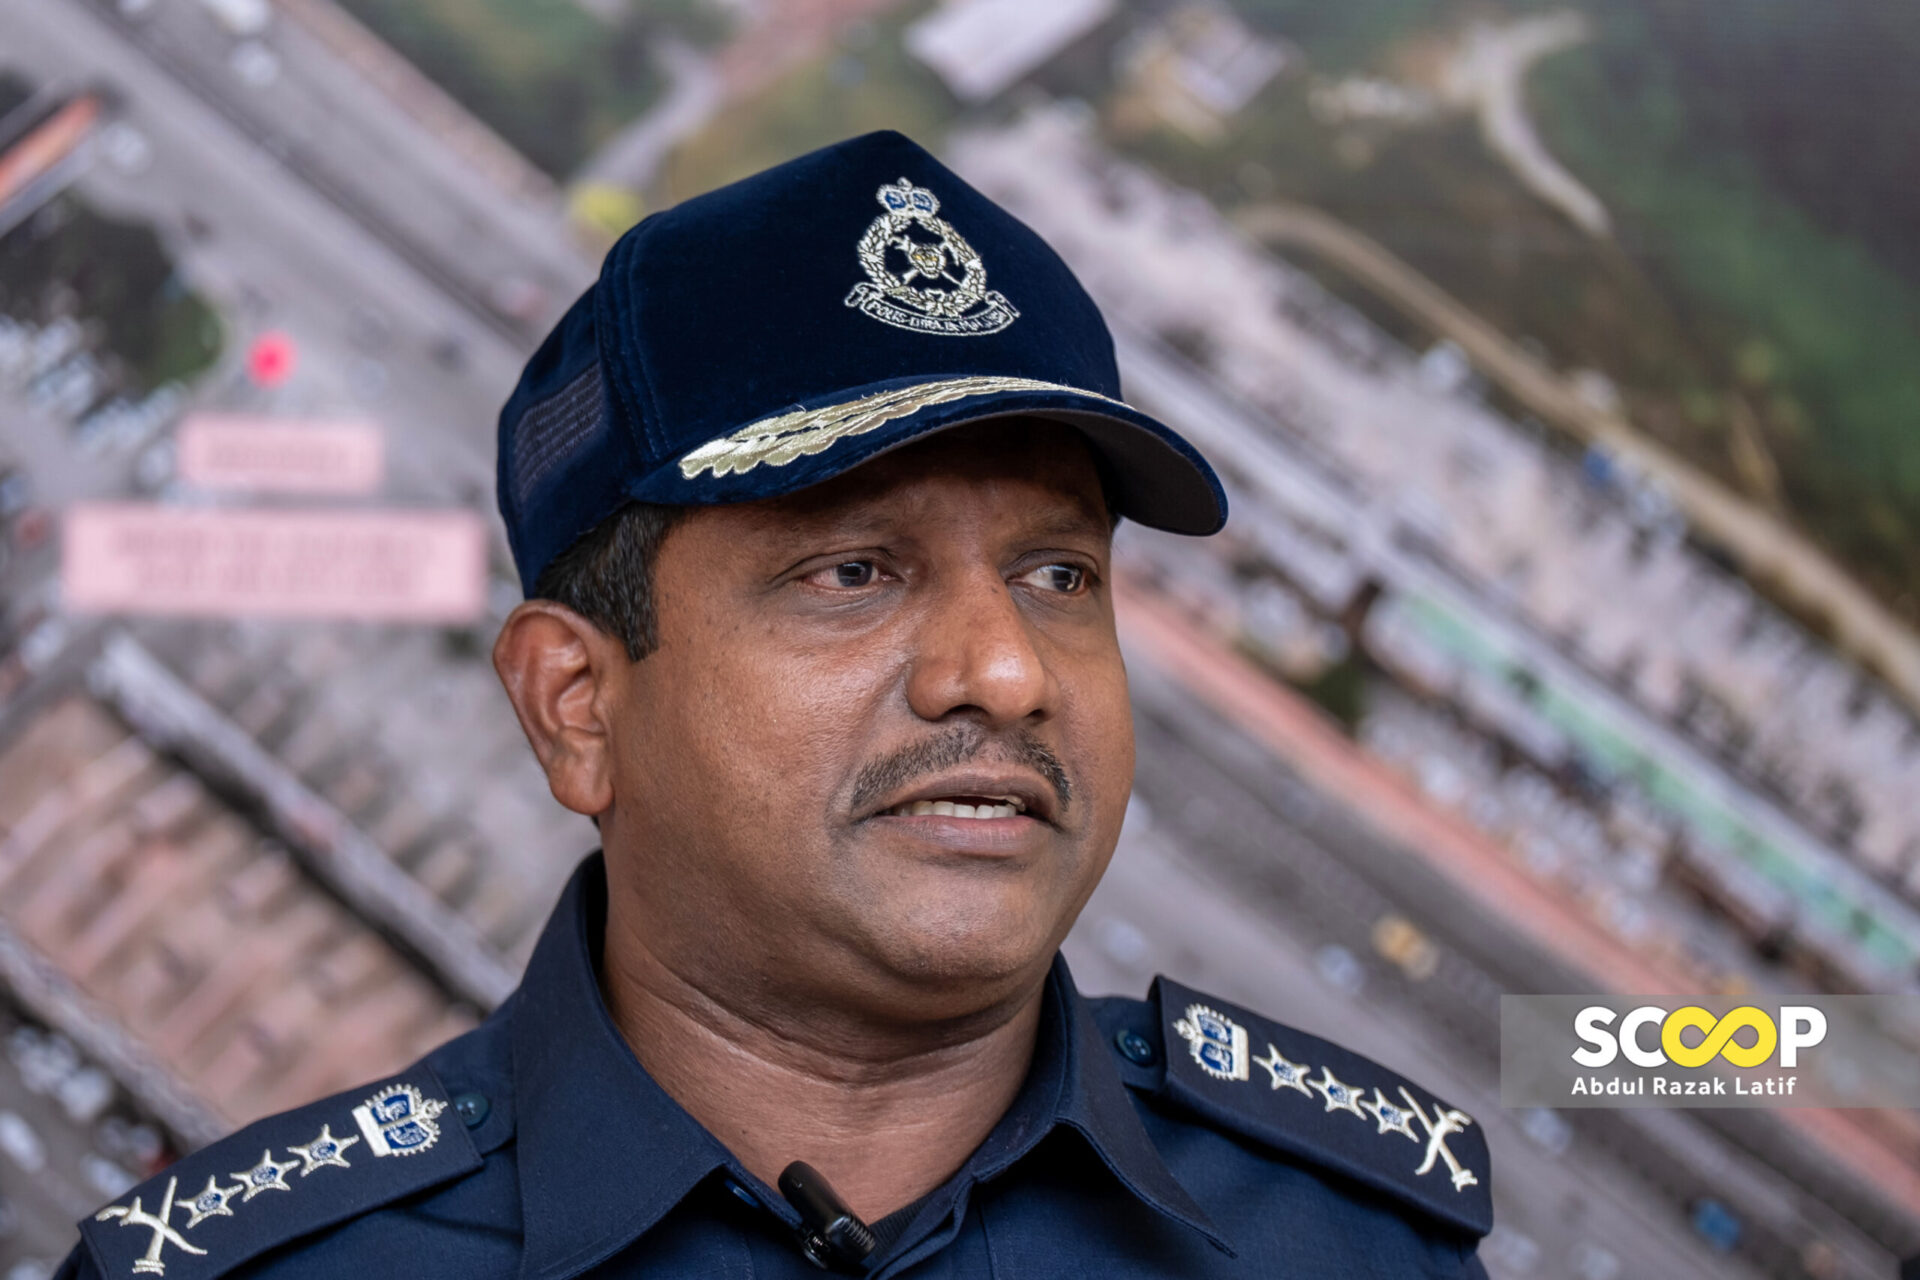 Kajang crime rate drops 13.5% thanks to community efforts: police chief